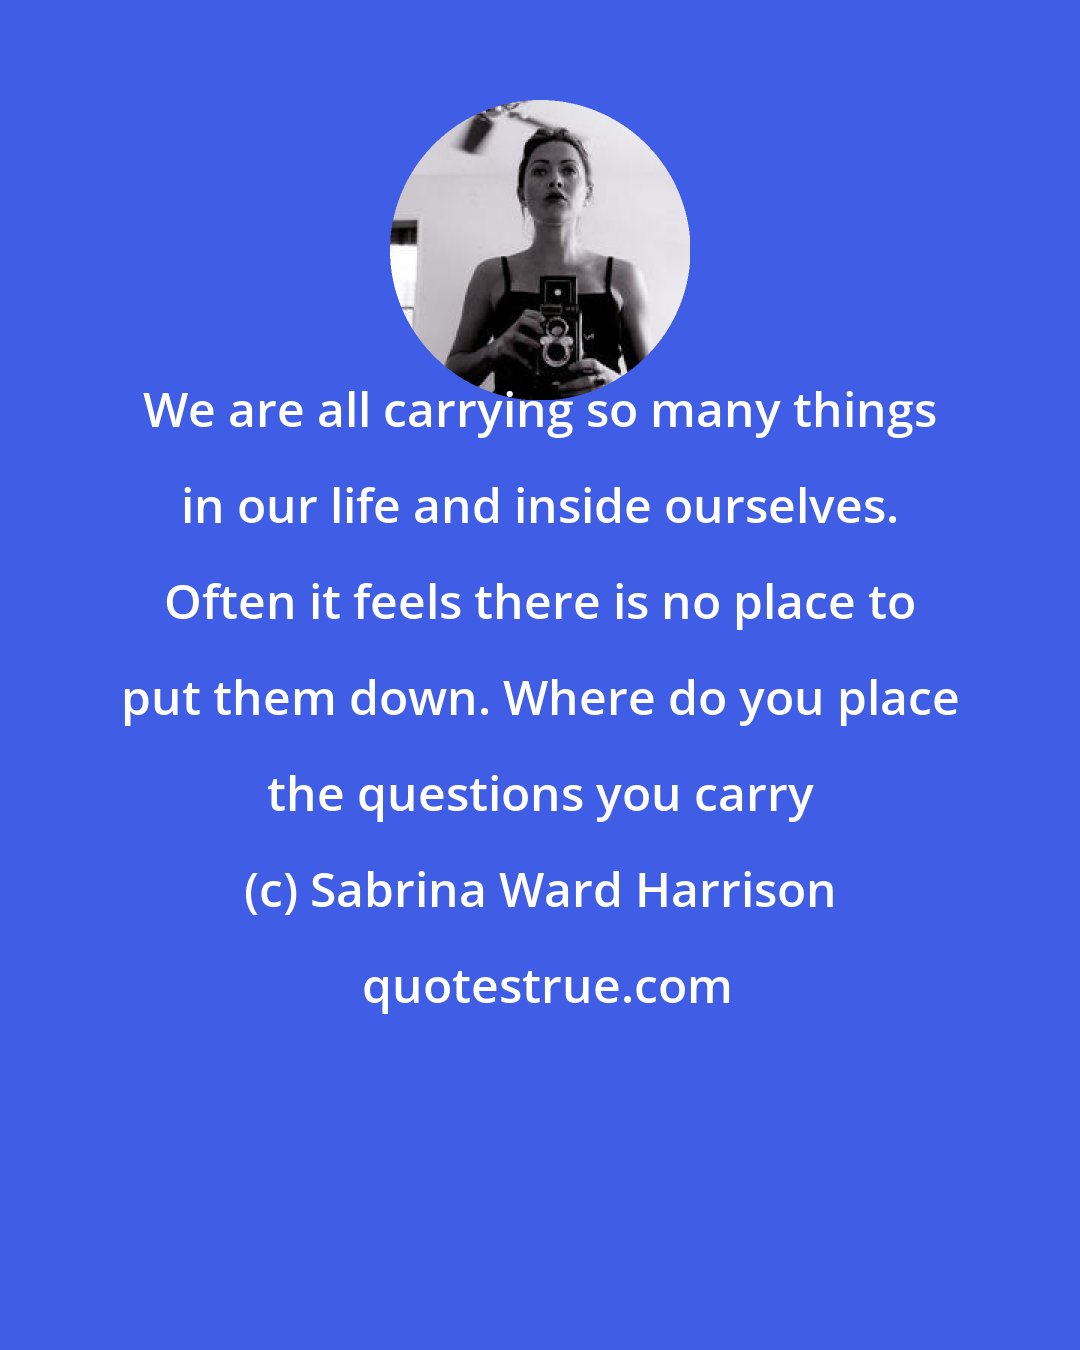 Sabrina Ward Harrison: We are all carrying so many things in our life and inside ourselves. Often it feels there is no place to put them down. Where do you place the questions you carry